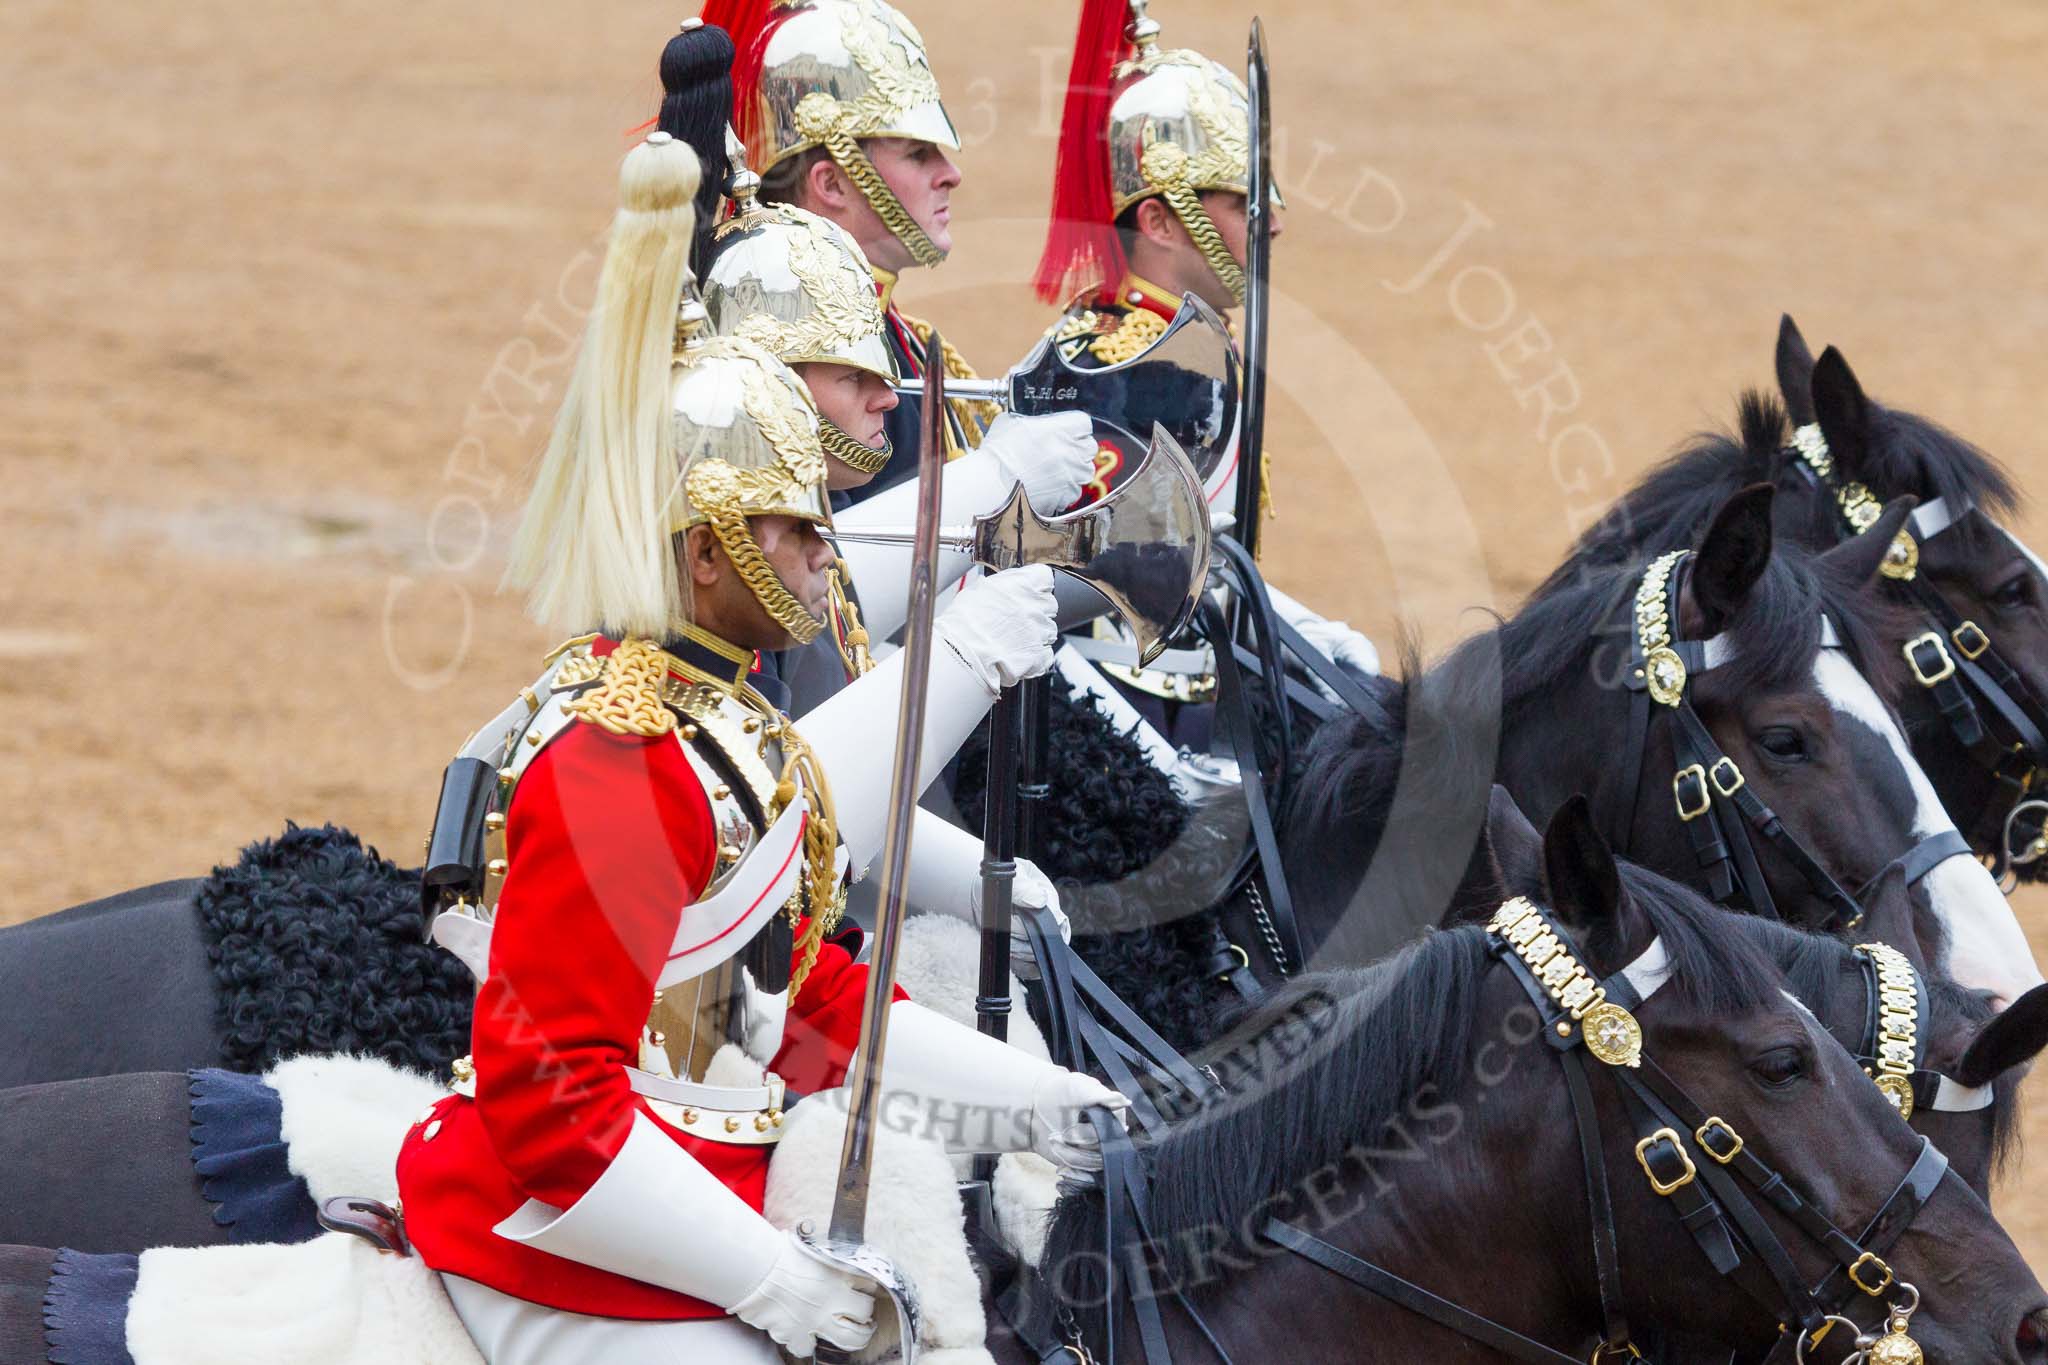 Trooping the Colour 2015. Image #608, 13 June 2015 11:58 Horse Guards Parade, London, UK